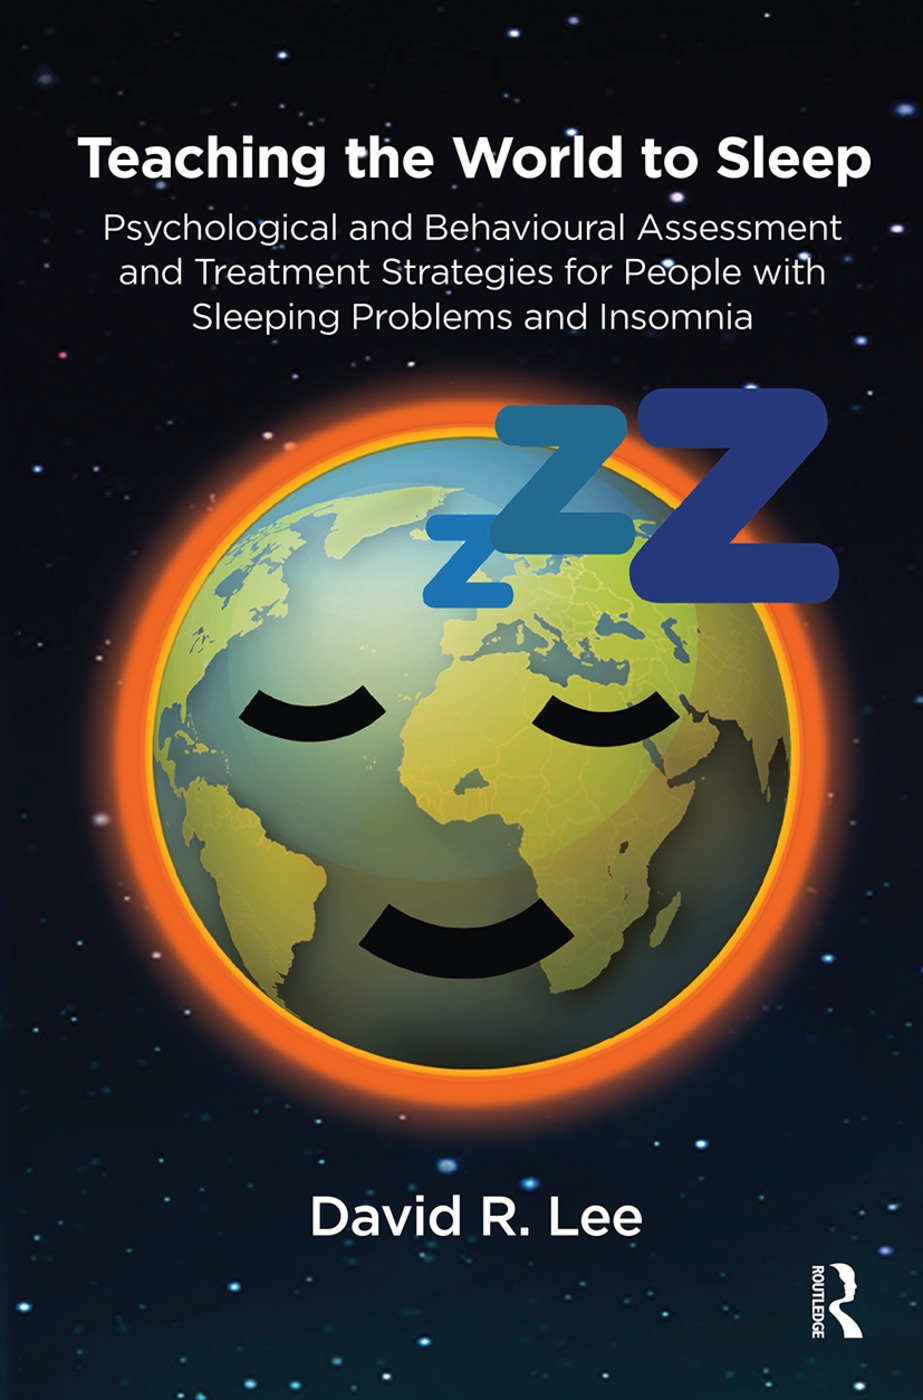 Teaching the World to Sleep: Psychological and Behavioural Assessment and Treatment Strategies for People with Sleeping Problems and Insomnia